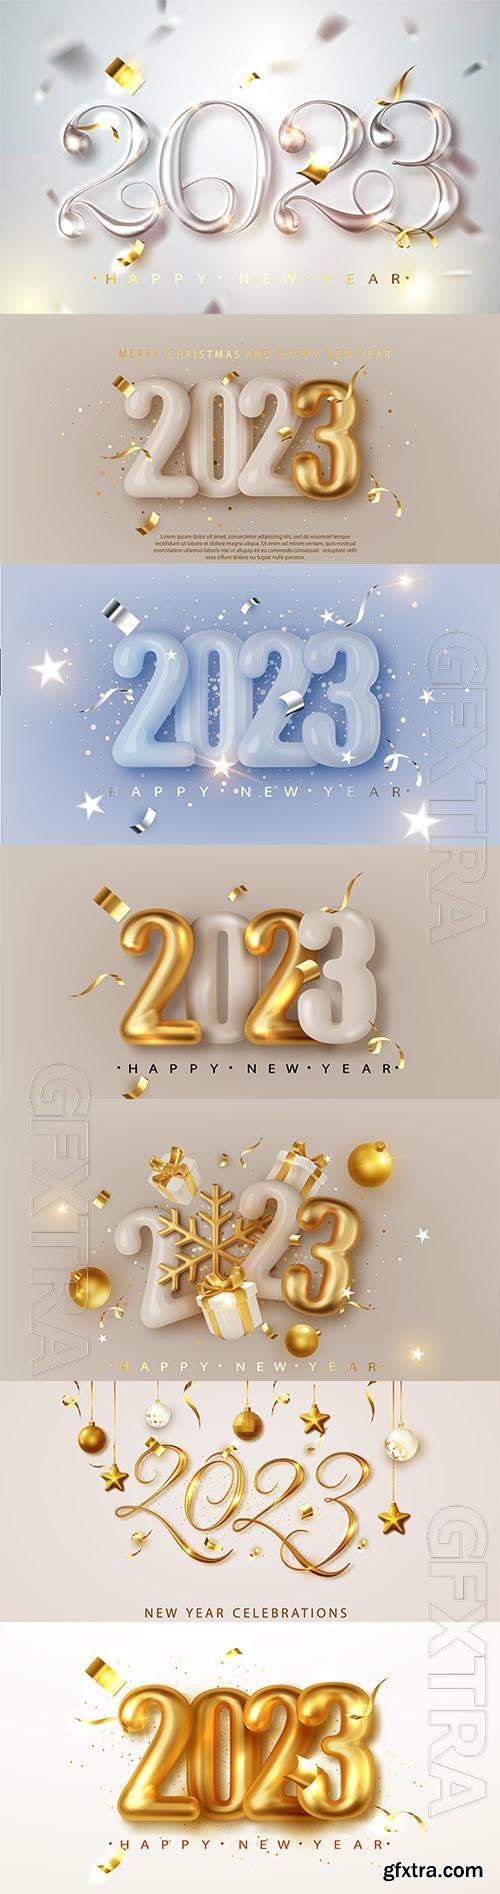 Happy new year 2023 golden numbers with ribbons and confetti